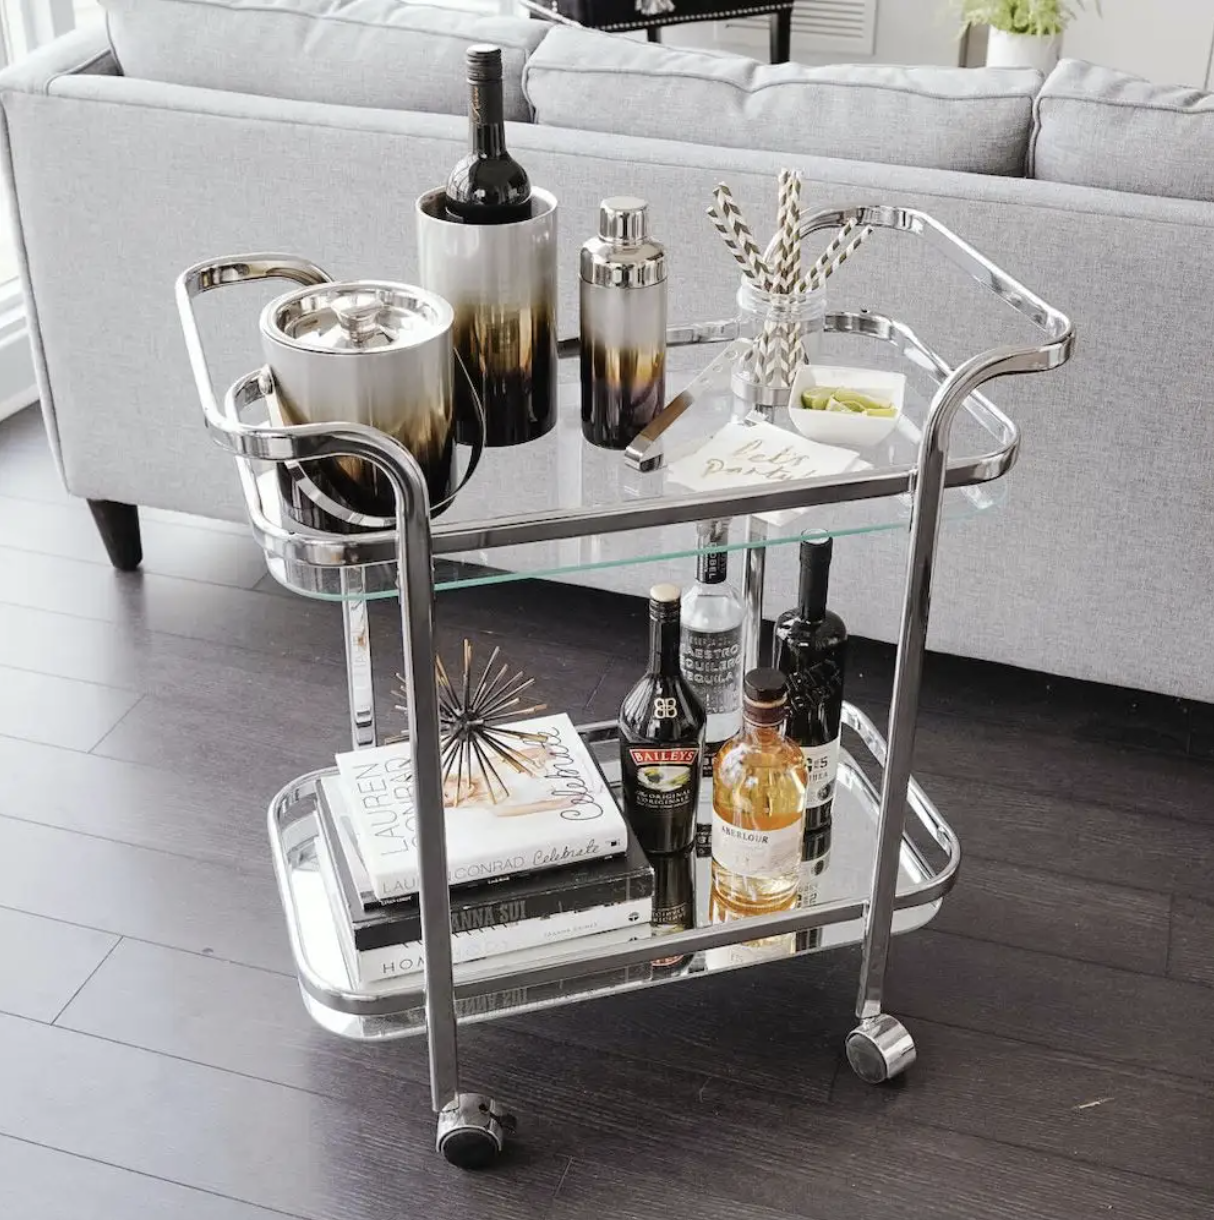 the bar cart filled with bottles of alcohol and books